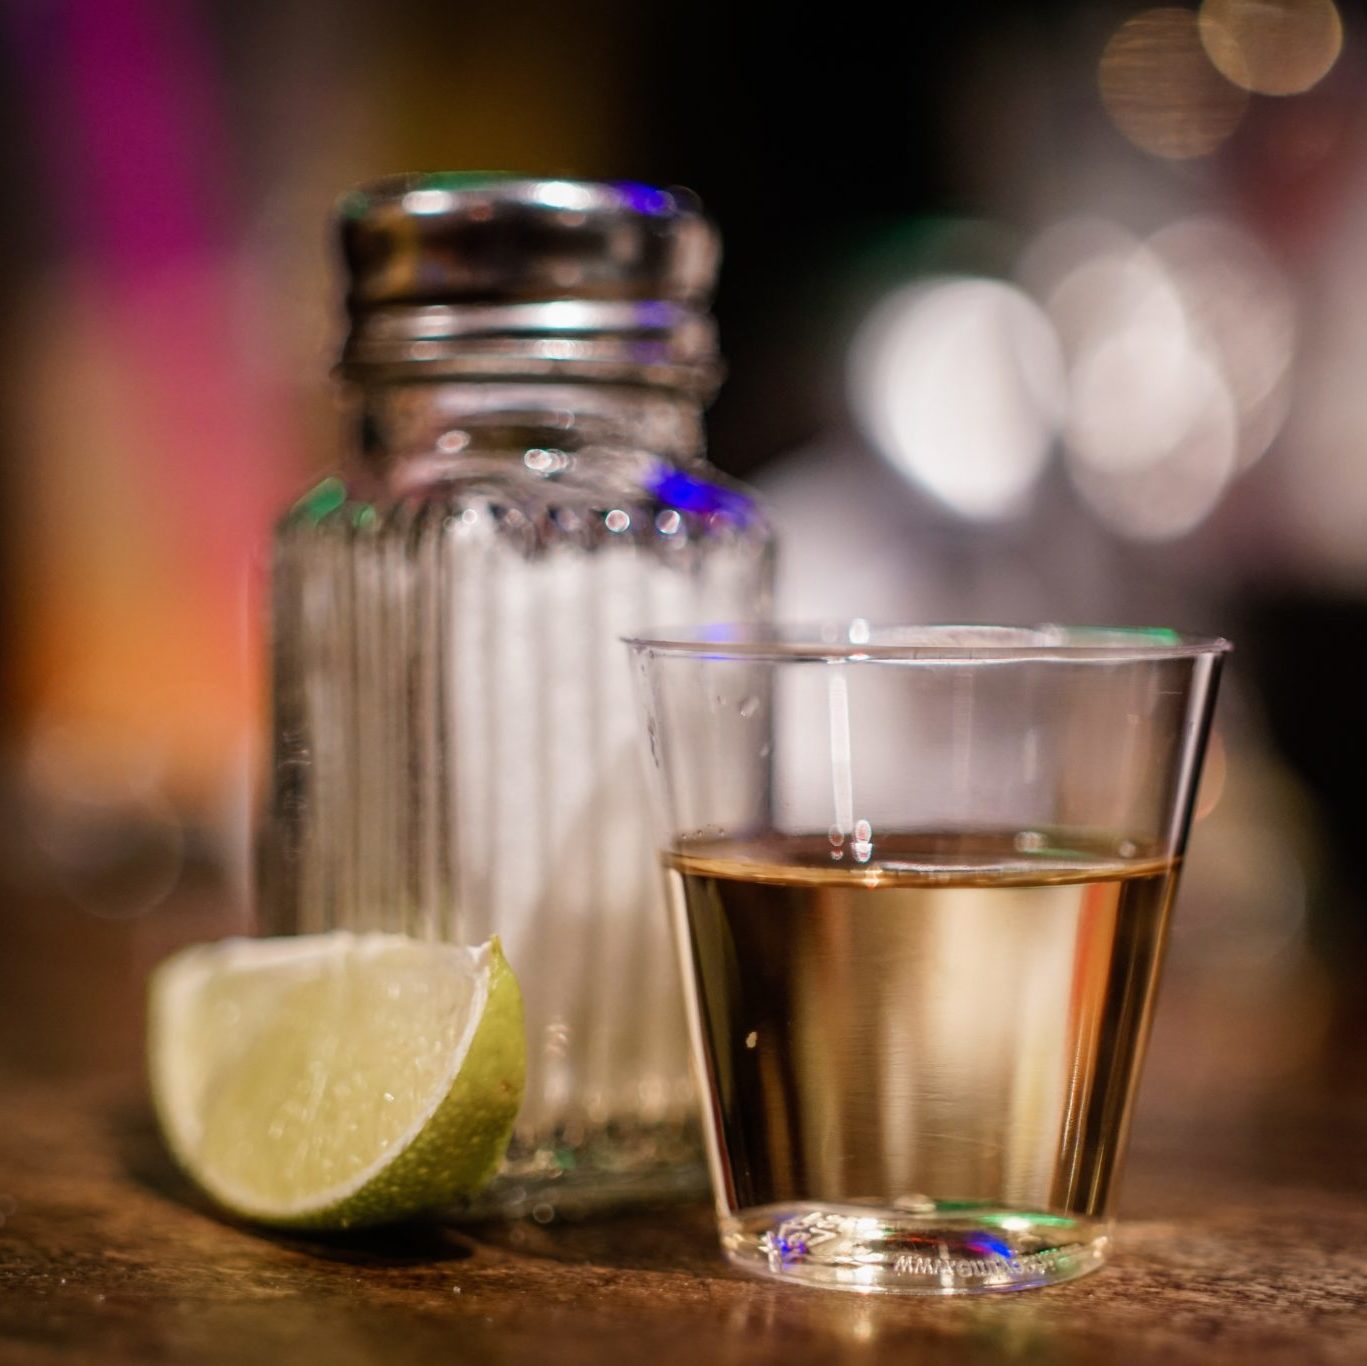 You are currently viewing Salud! It’s time to celebrate National Tequila Day!